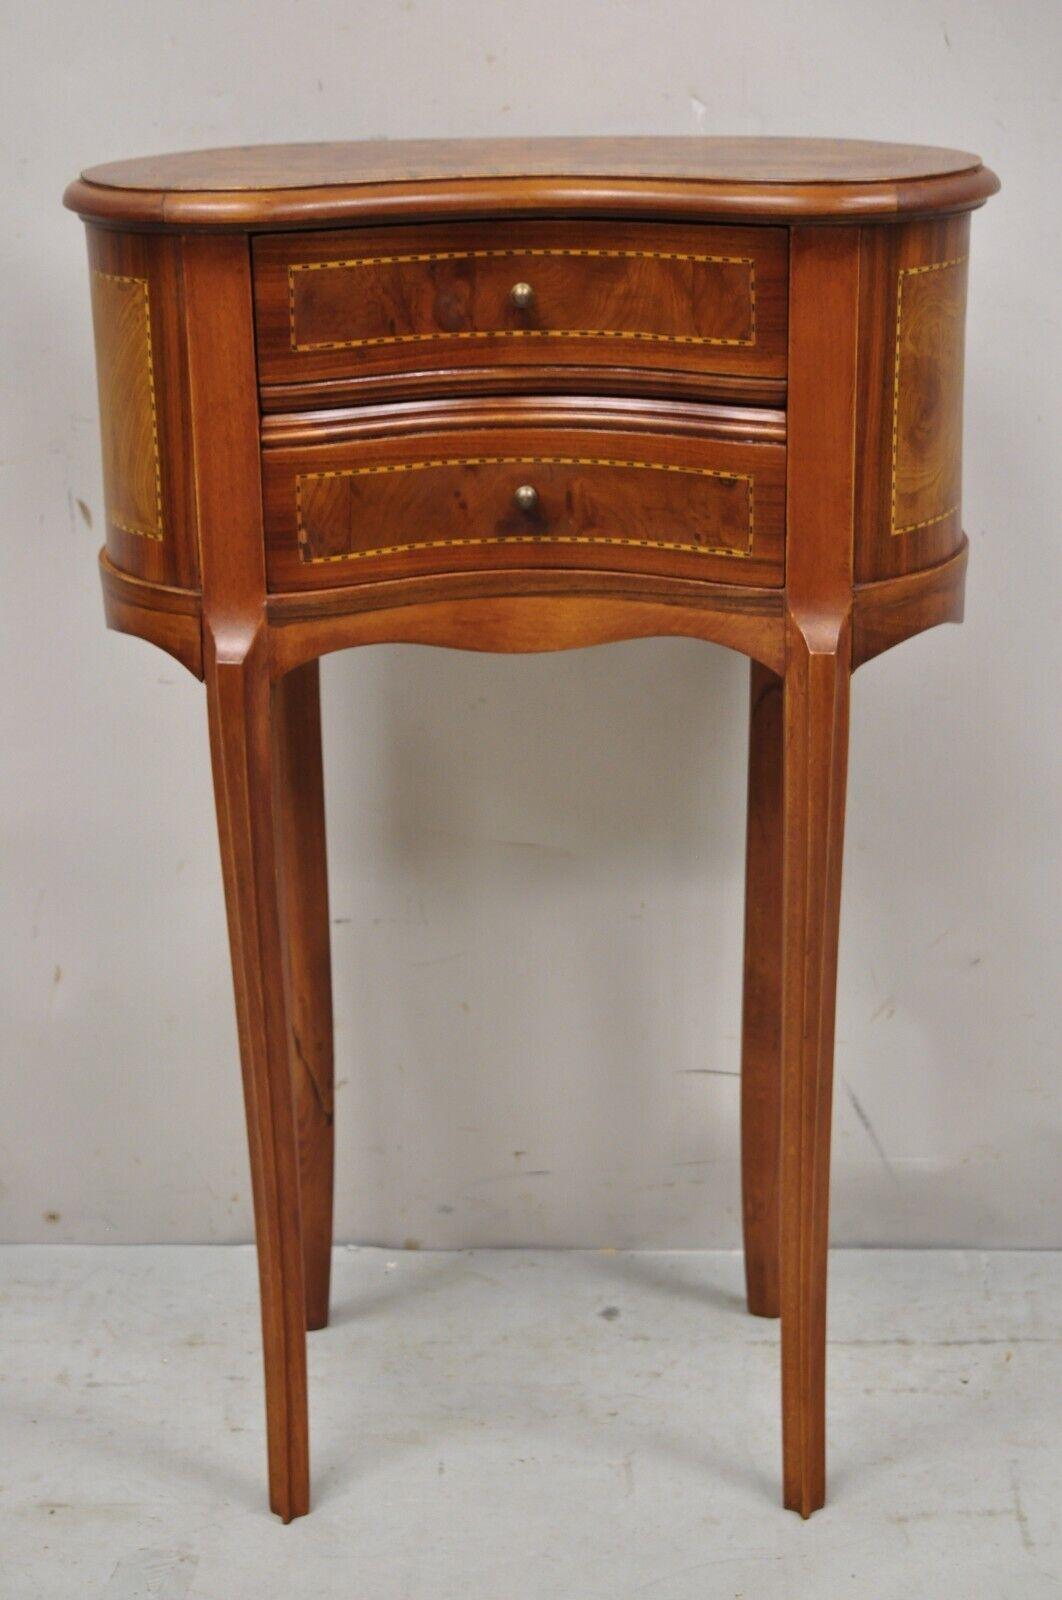 Vintage French Louis XV style kidney shaped burlwood nightstand side table. Item features beautiful wood grain, 2 dovetail drawers, cabriole legs, nice inlay. Circa late 20th century. Measurements: 31.5